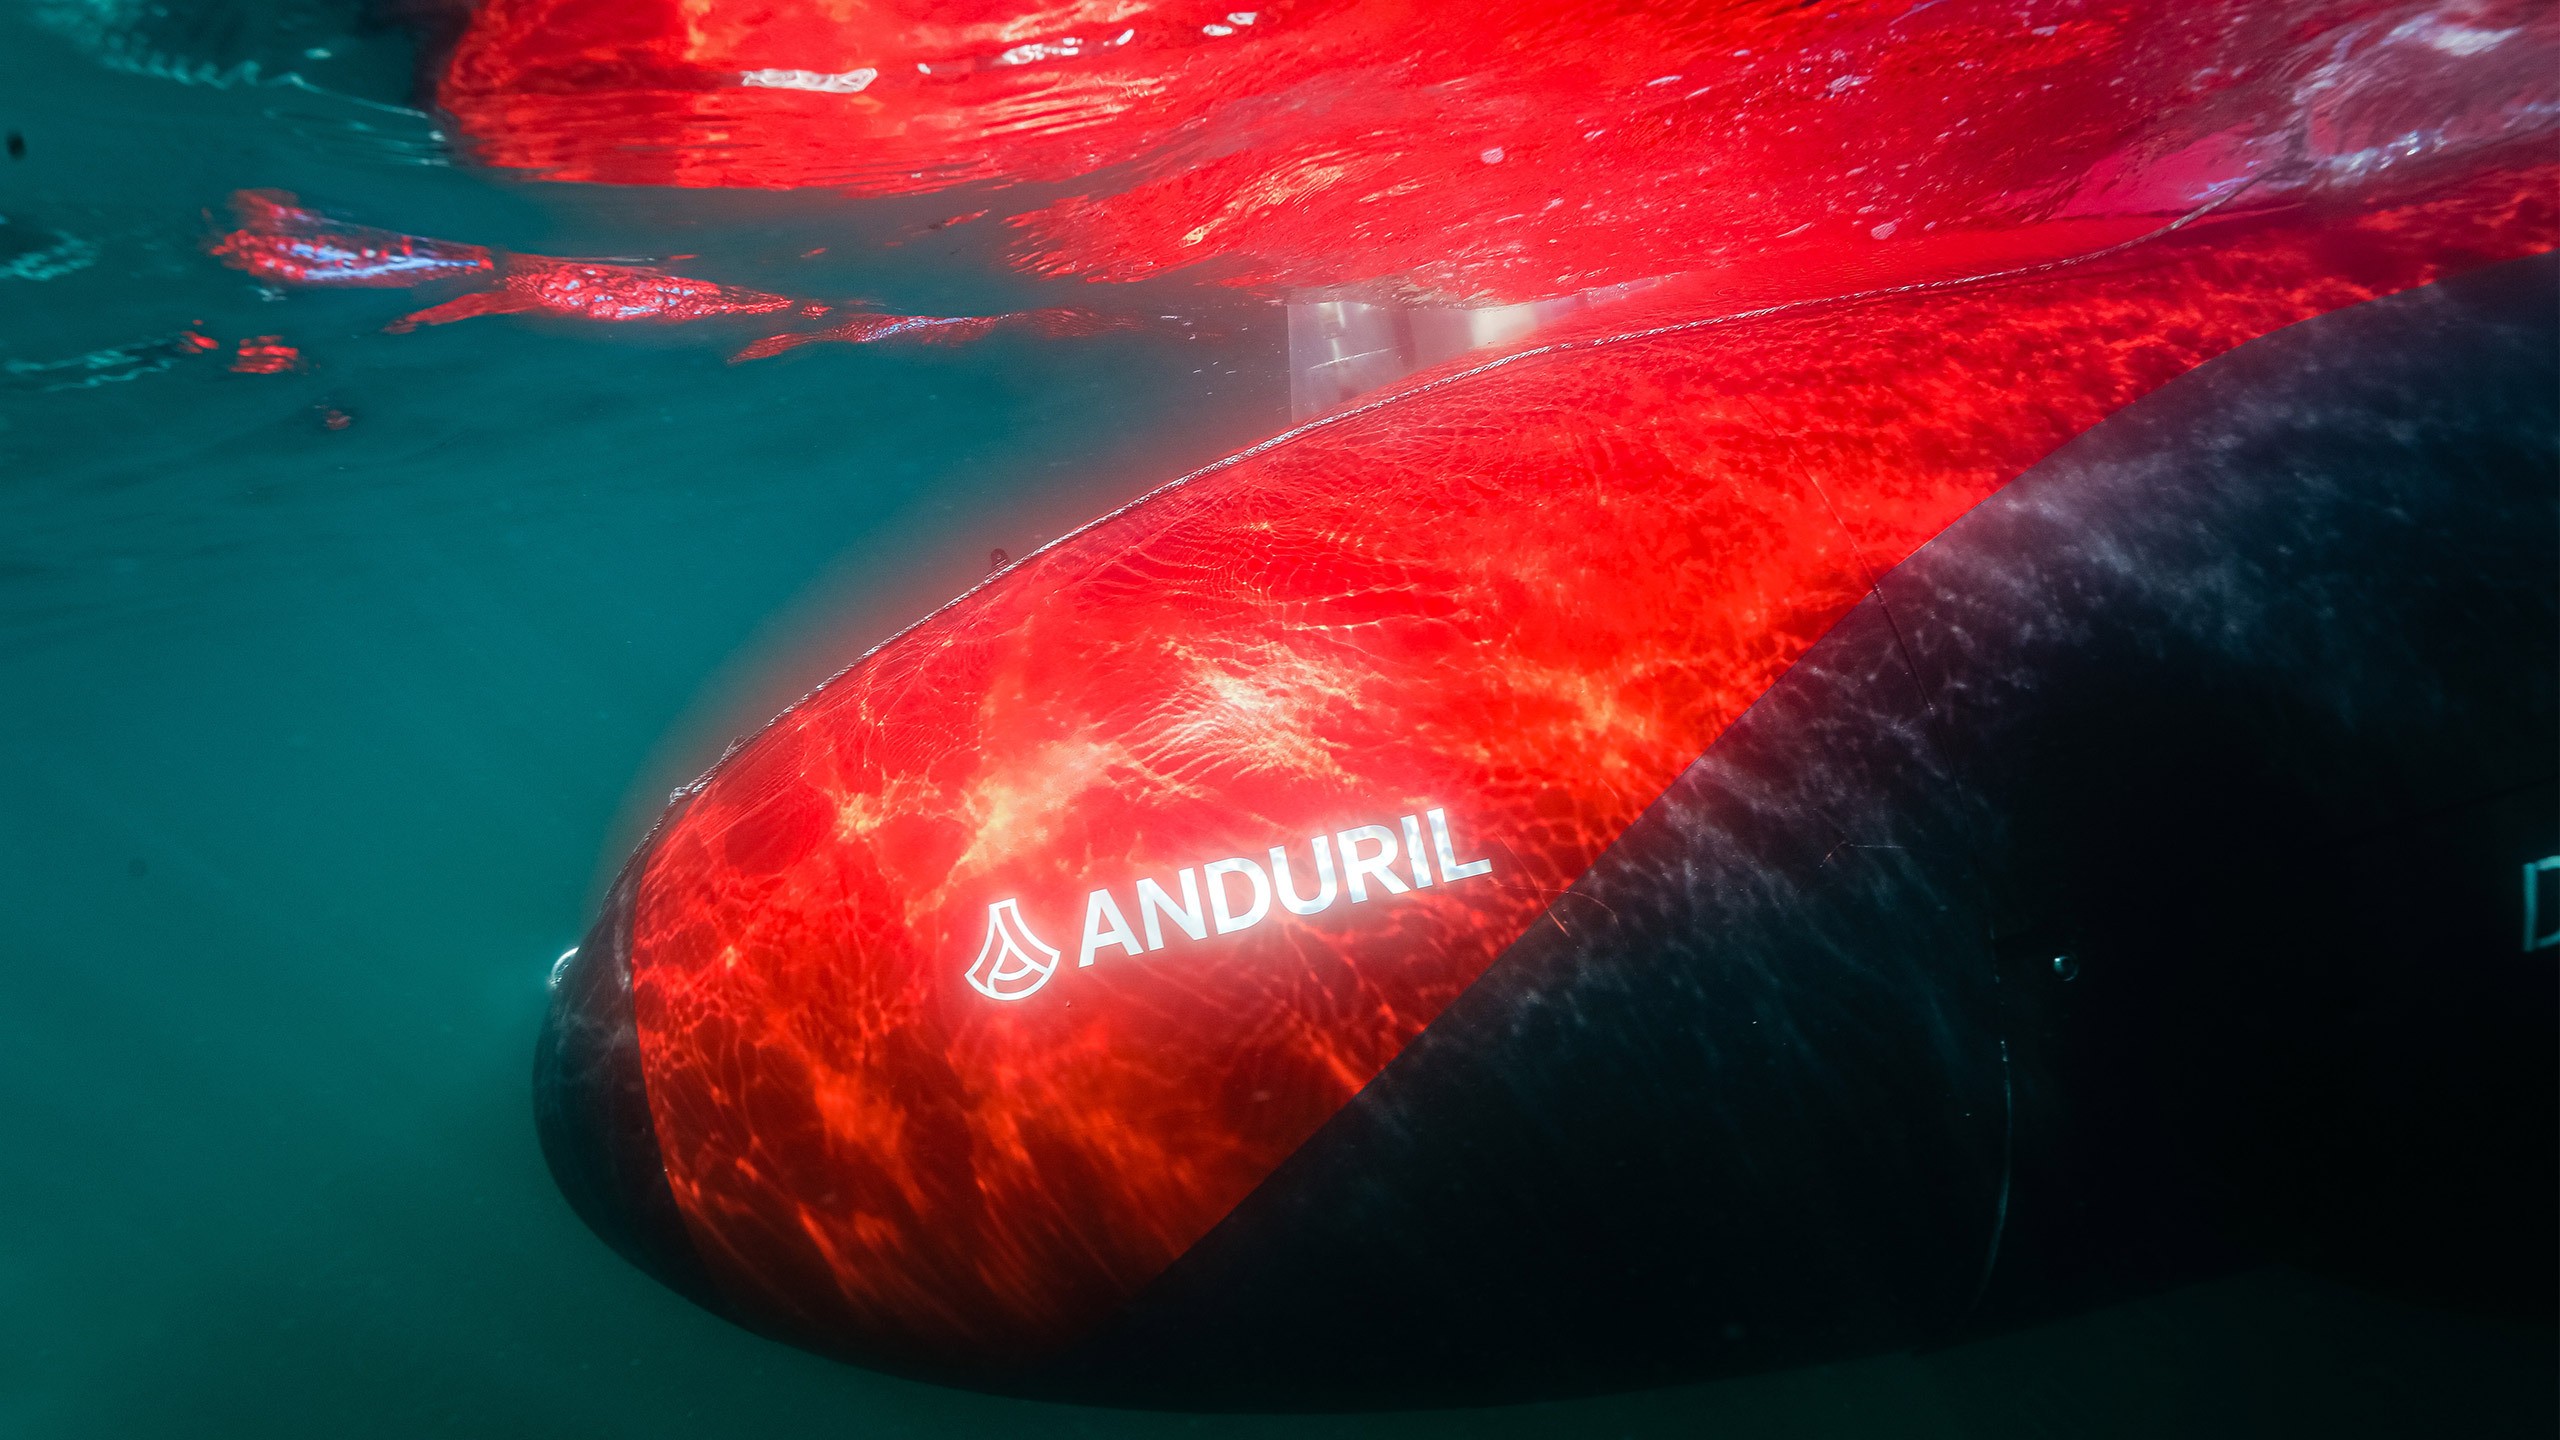 DIU awards Anduril contract to innovate new capabilities for undersea warfare